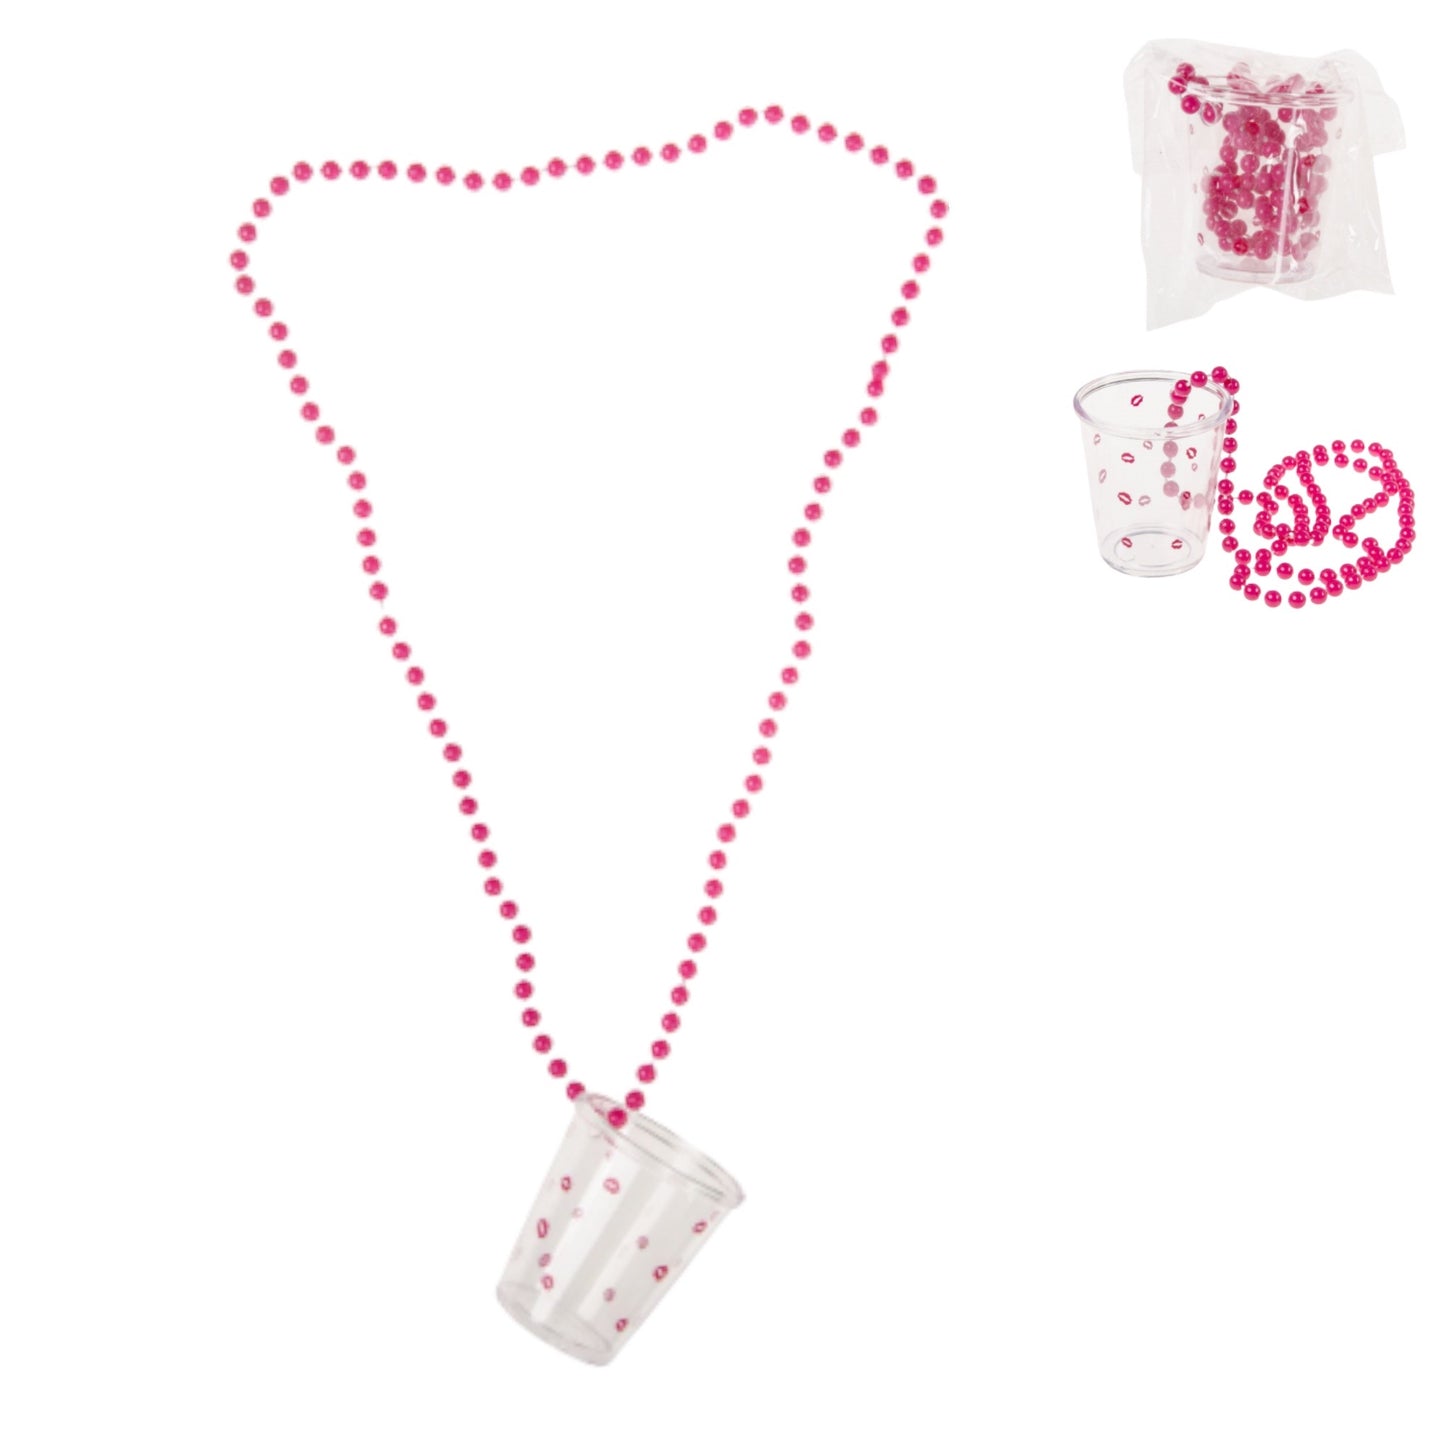 Kinky Pleasure Shot Glass Necklace with Lips Motif - Always a Shot Within Reach!